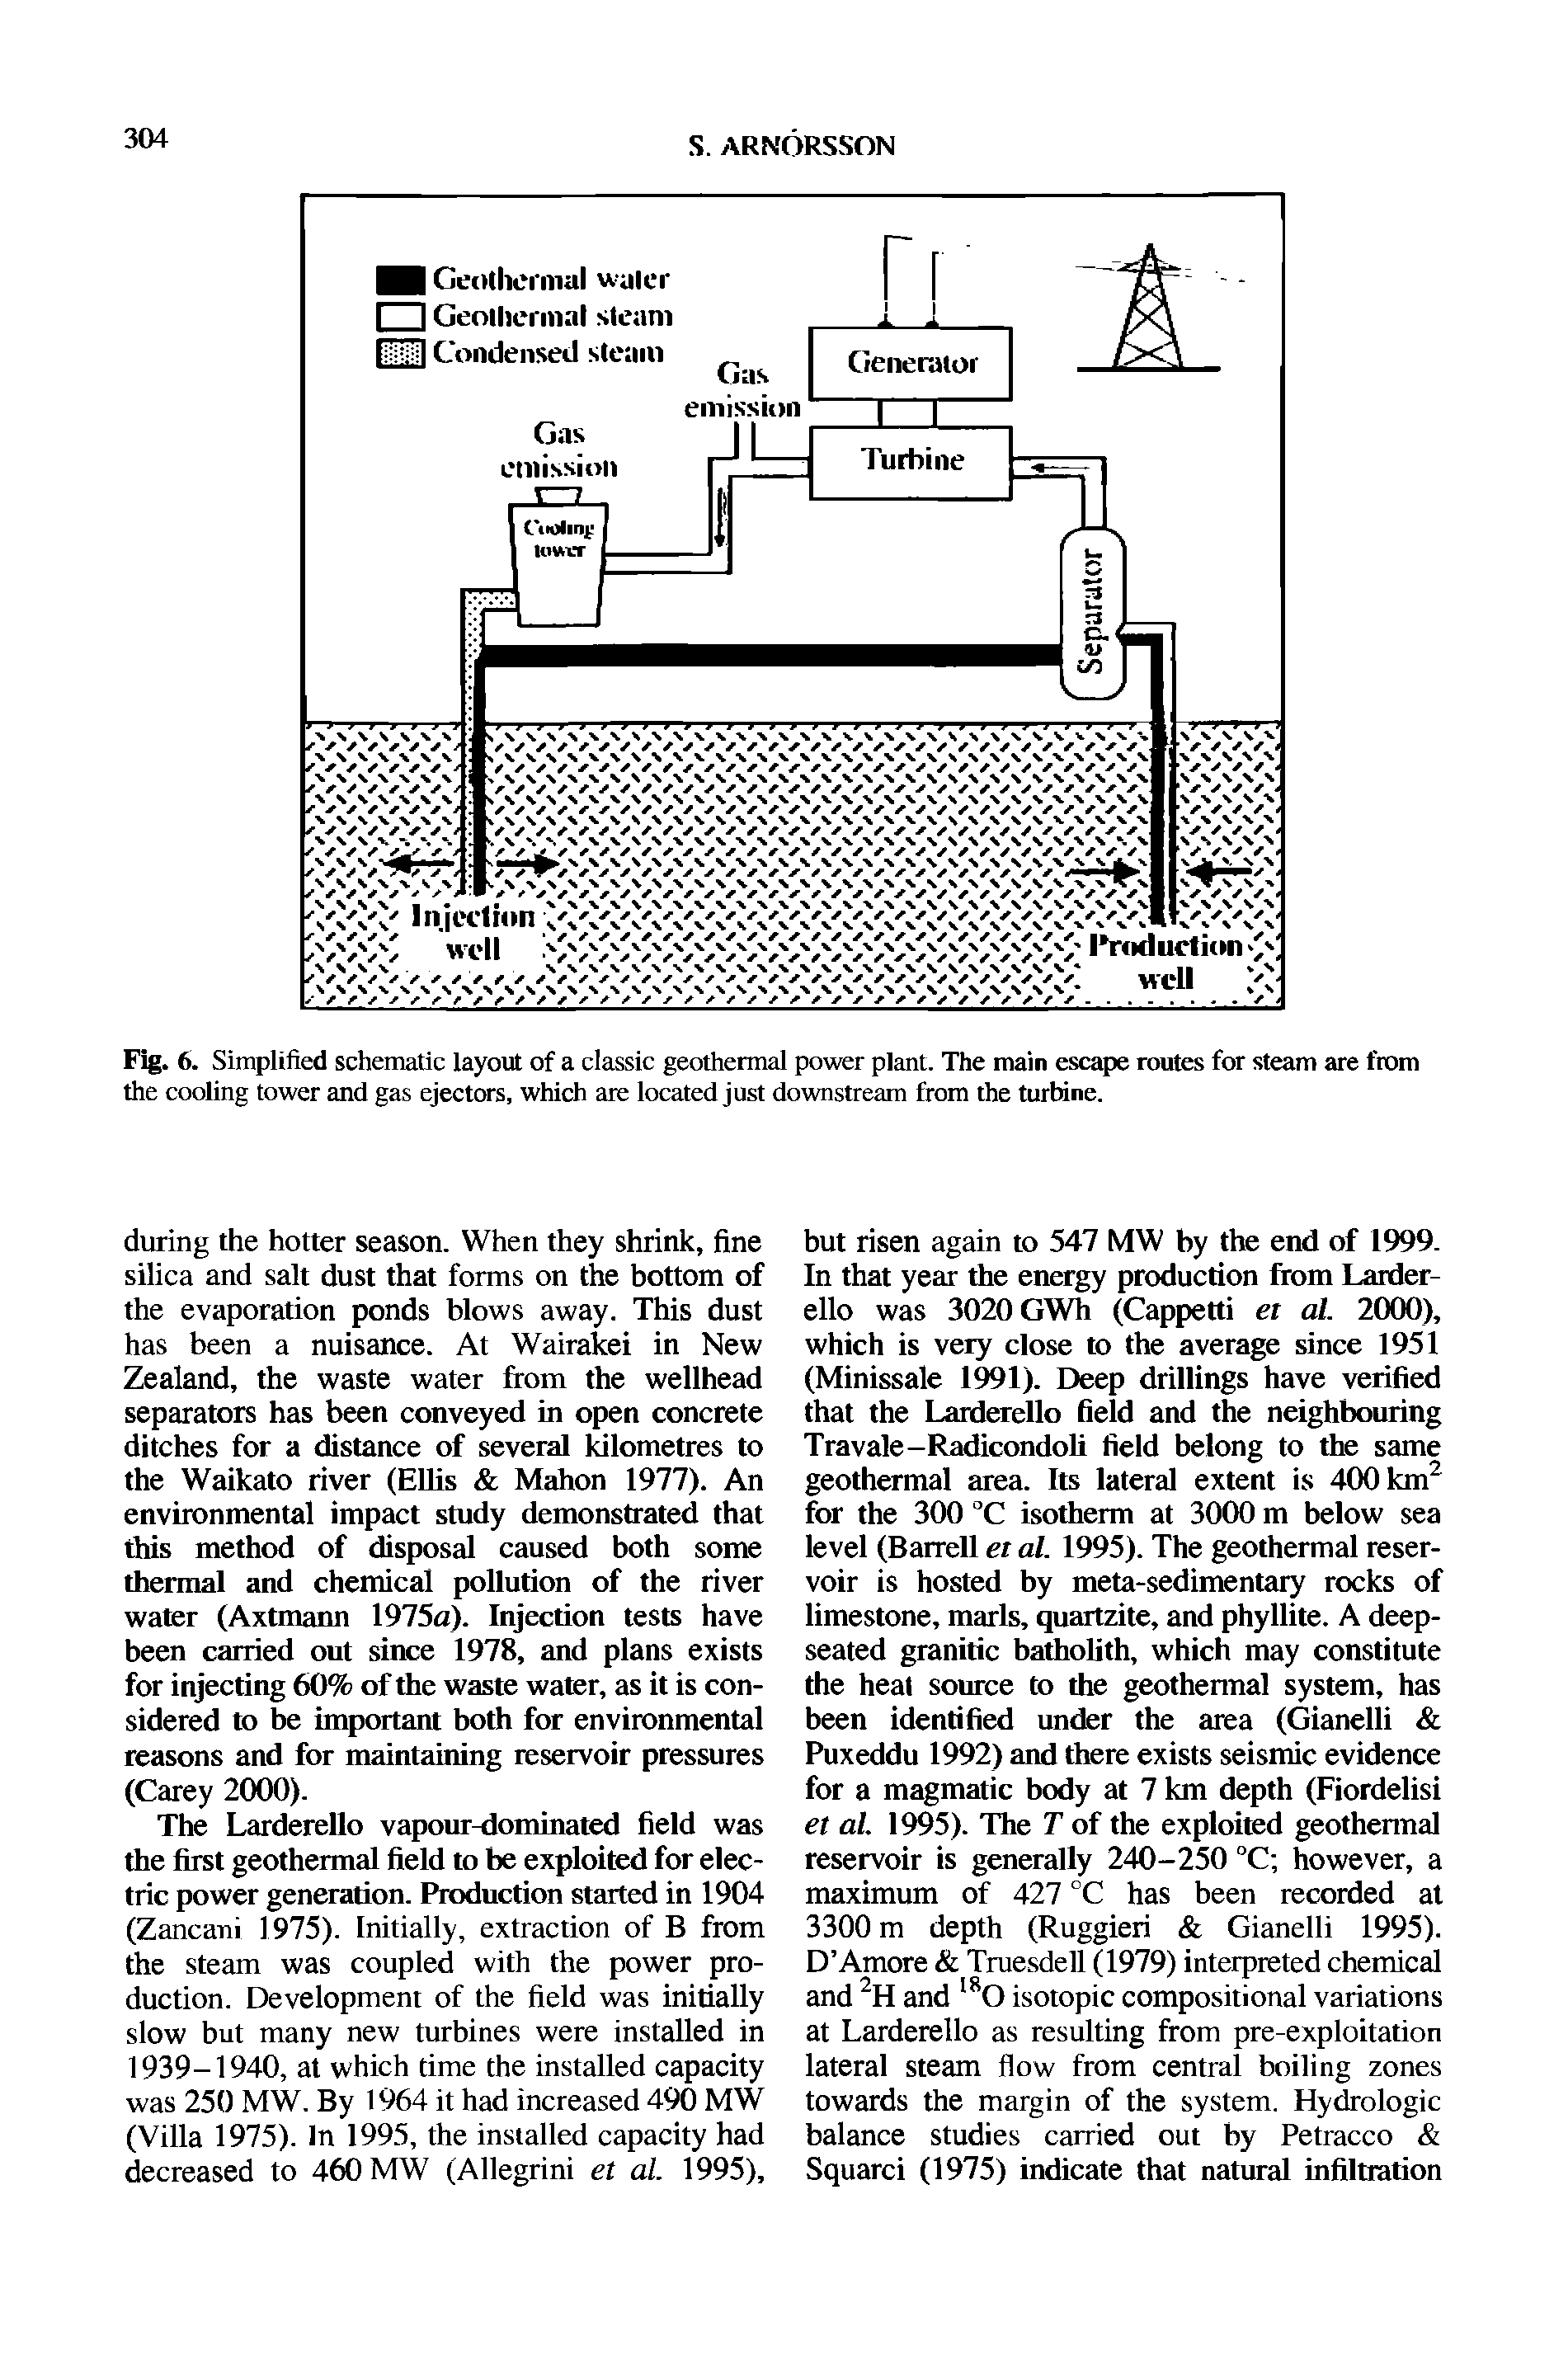 Fig. 6. Simplified schematic layout of a classic geothermal power plant. The main escape routes for steam are from the cooling tower and gas ejectors, which are located just downstream from the turbine.